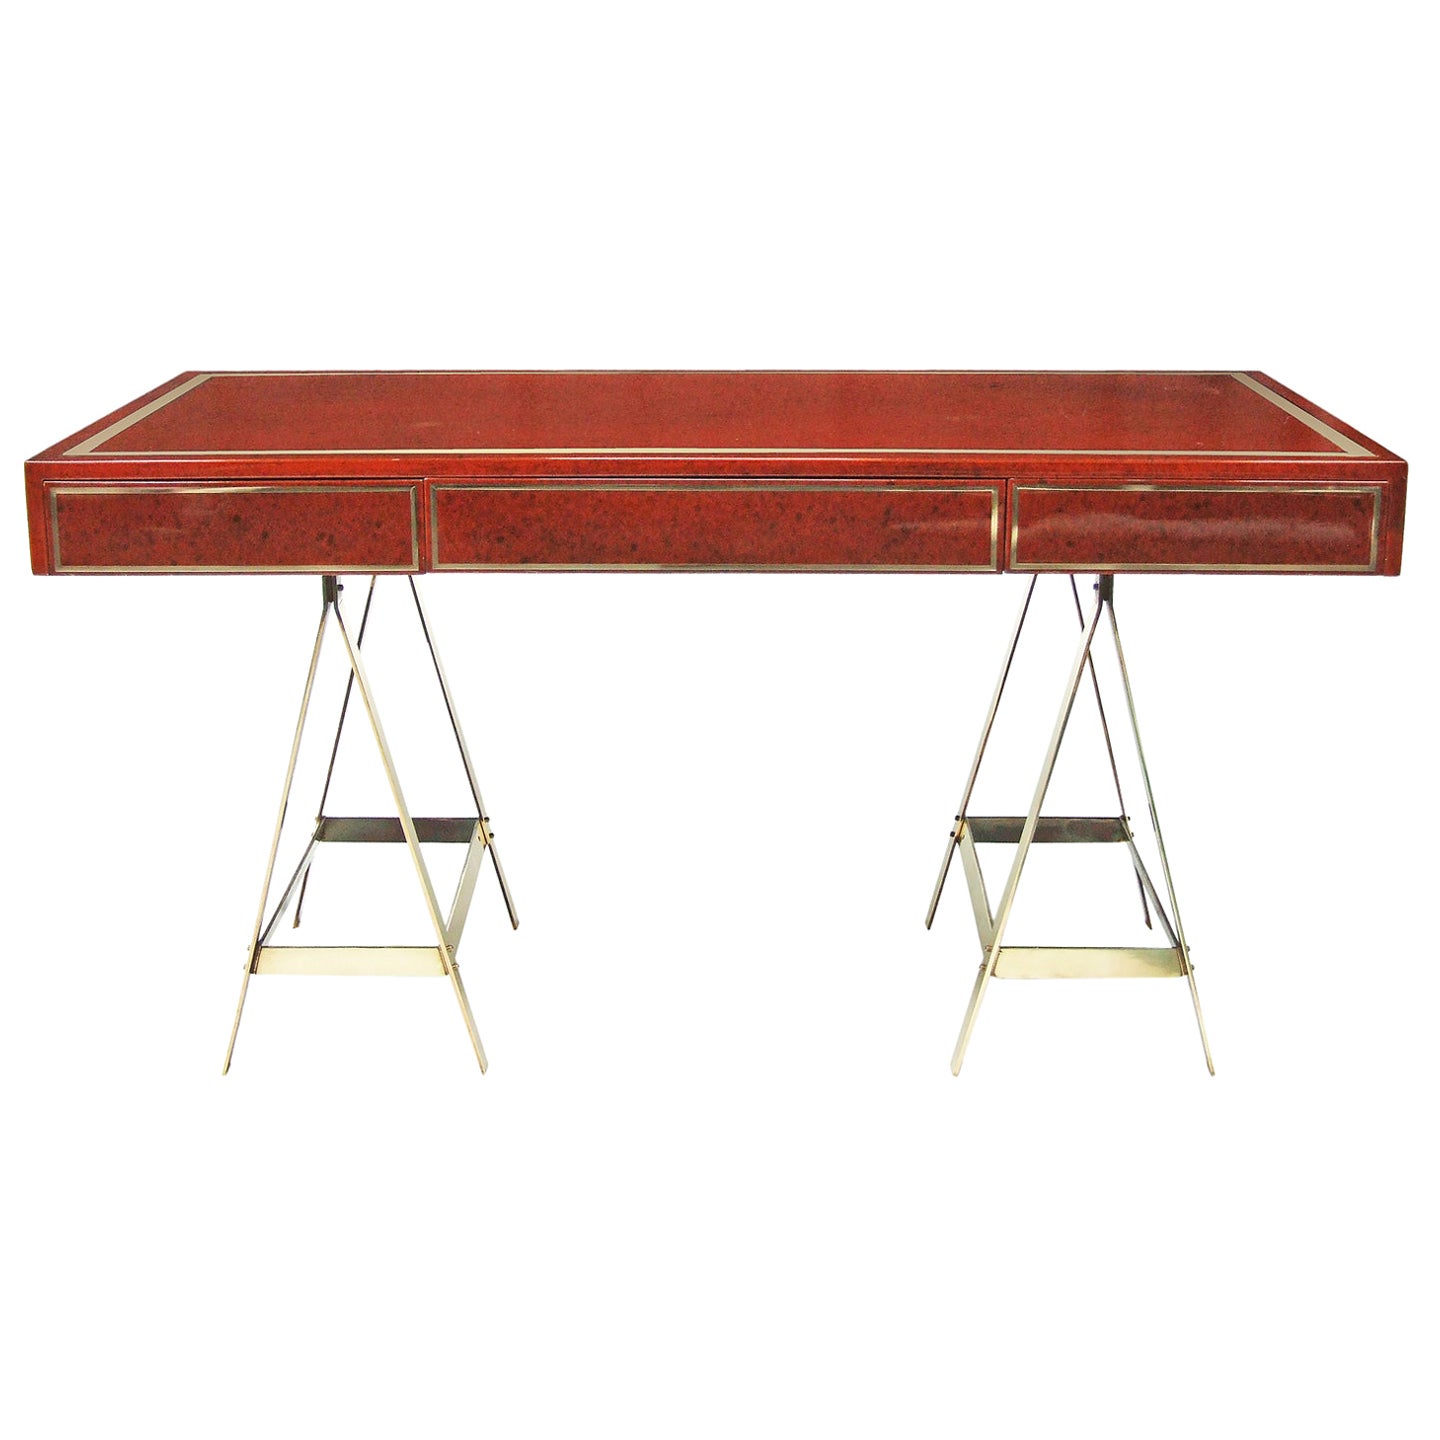 1970s Original Red Lacquered Albrizzi Desk with Brass Trestle Legs and Inlay